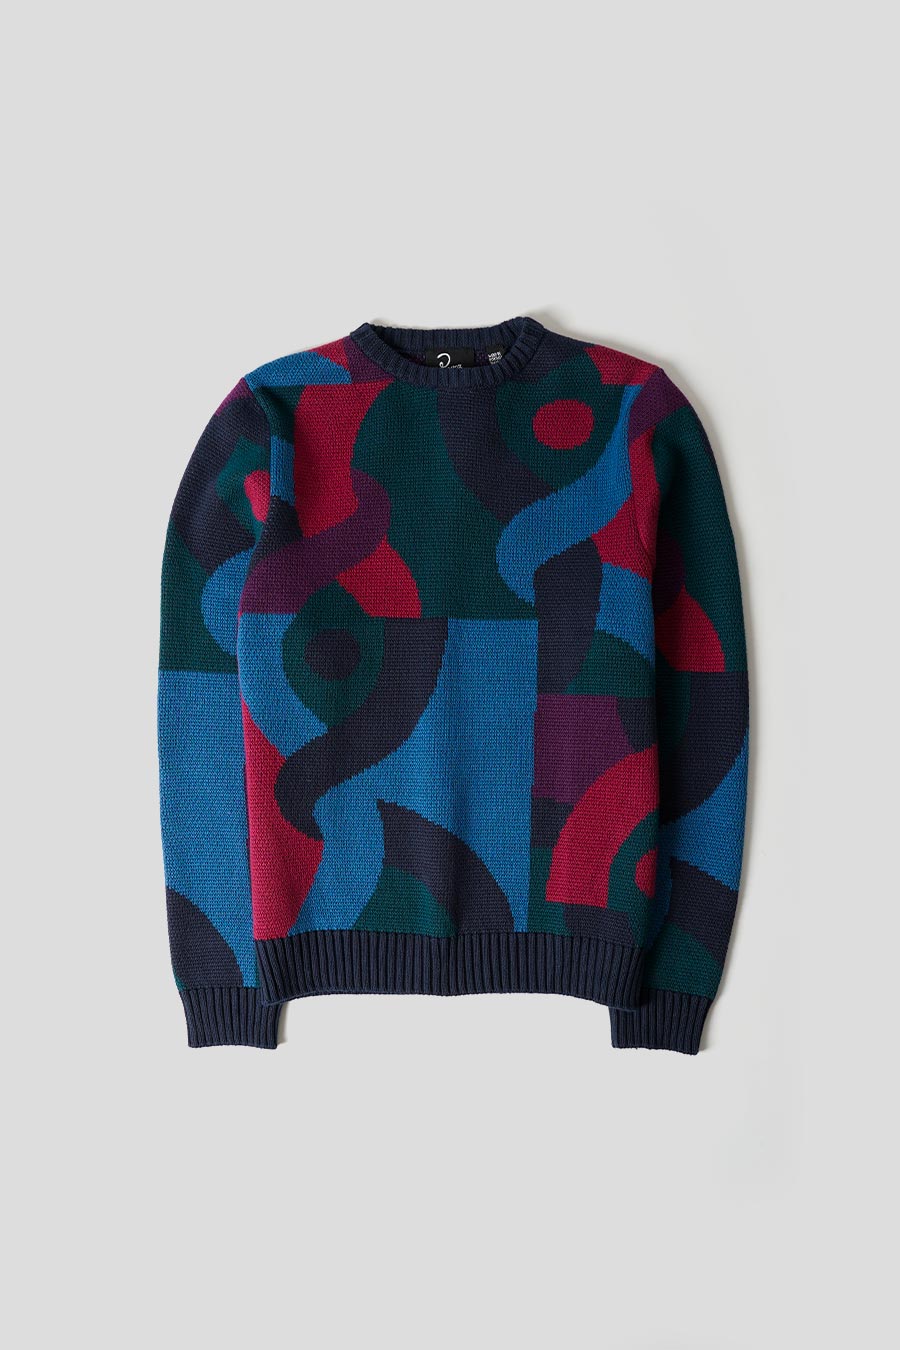 BY PARRA - BLUE, GREEN AND RED KNITTED JUMPER - LE LABO STORE